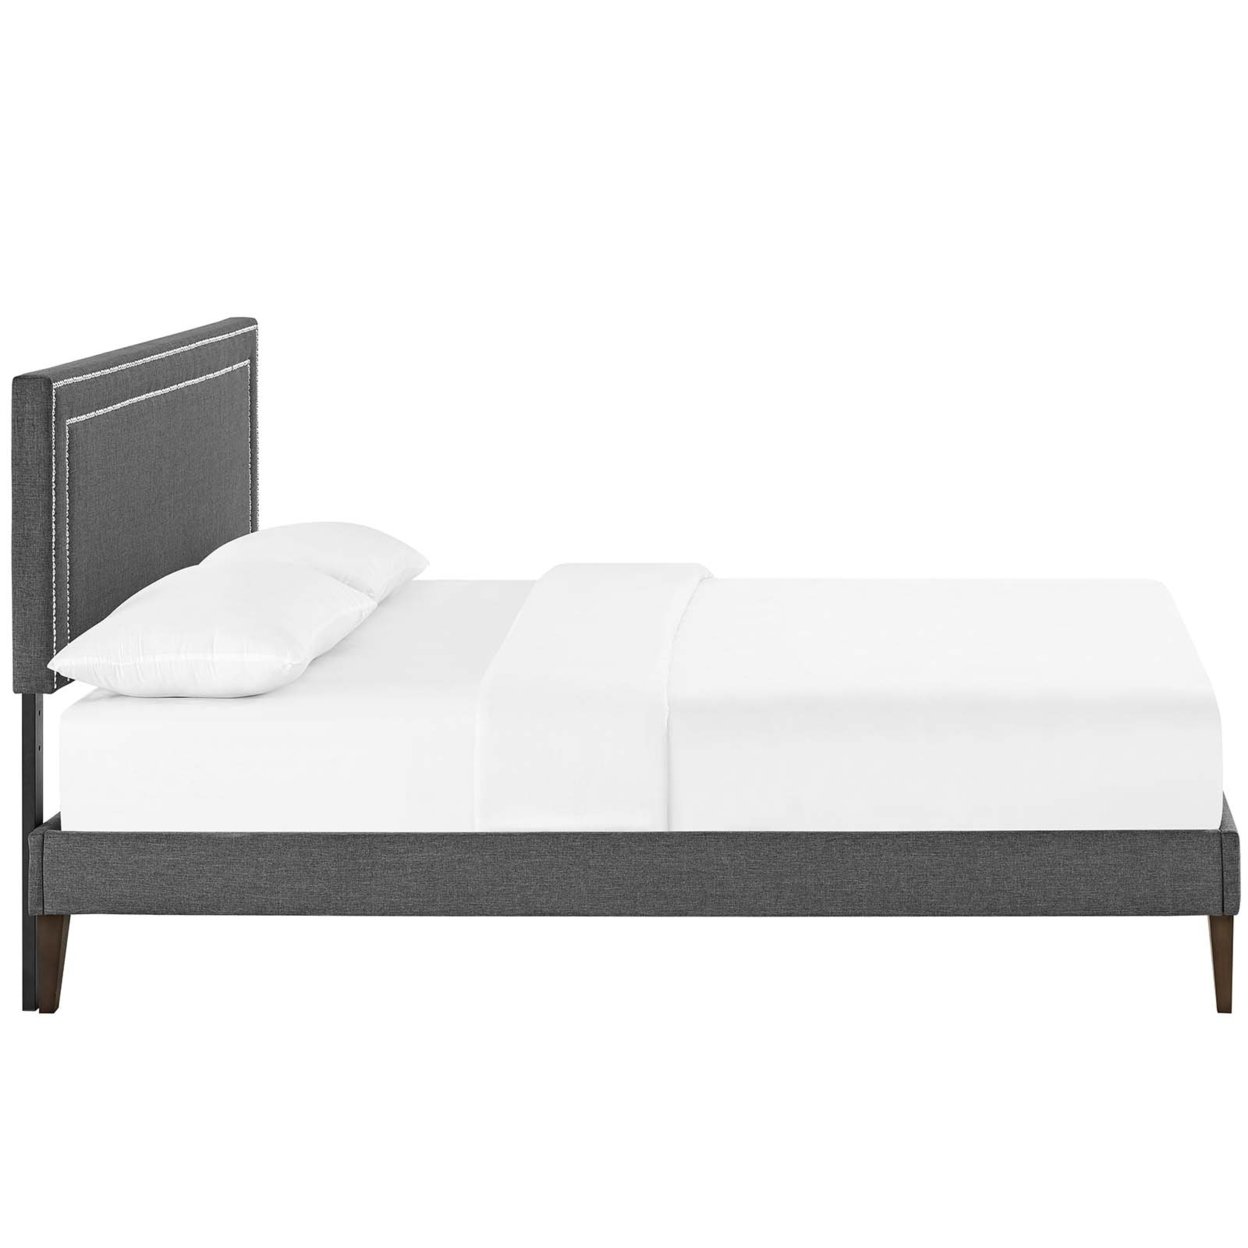 Virginia Full Fabric Platform Bed With Squared Tapered Legs, Gray